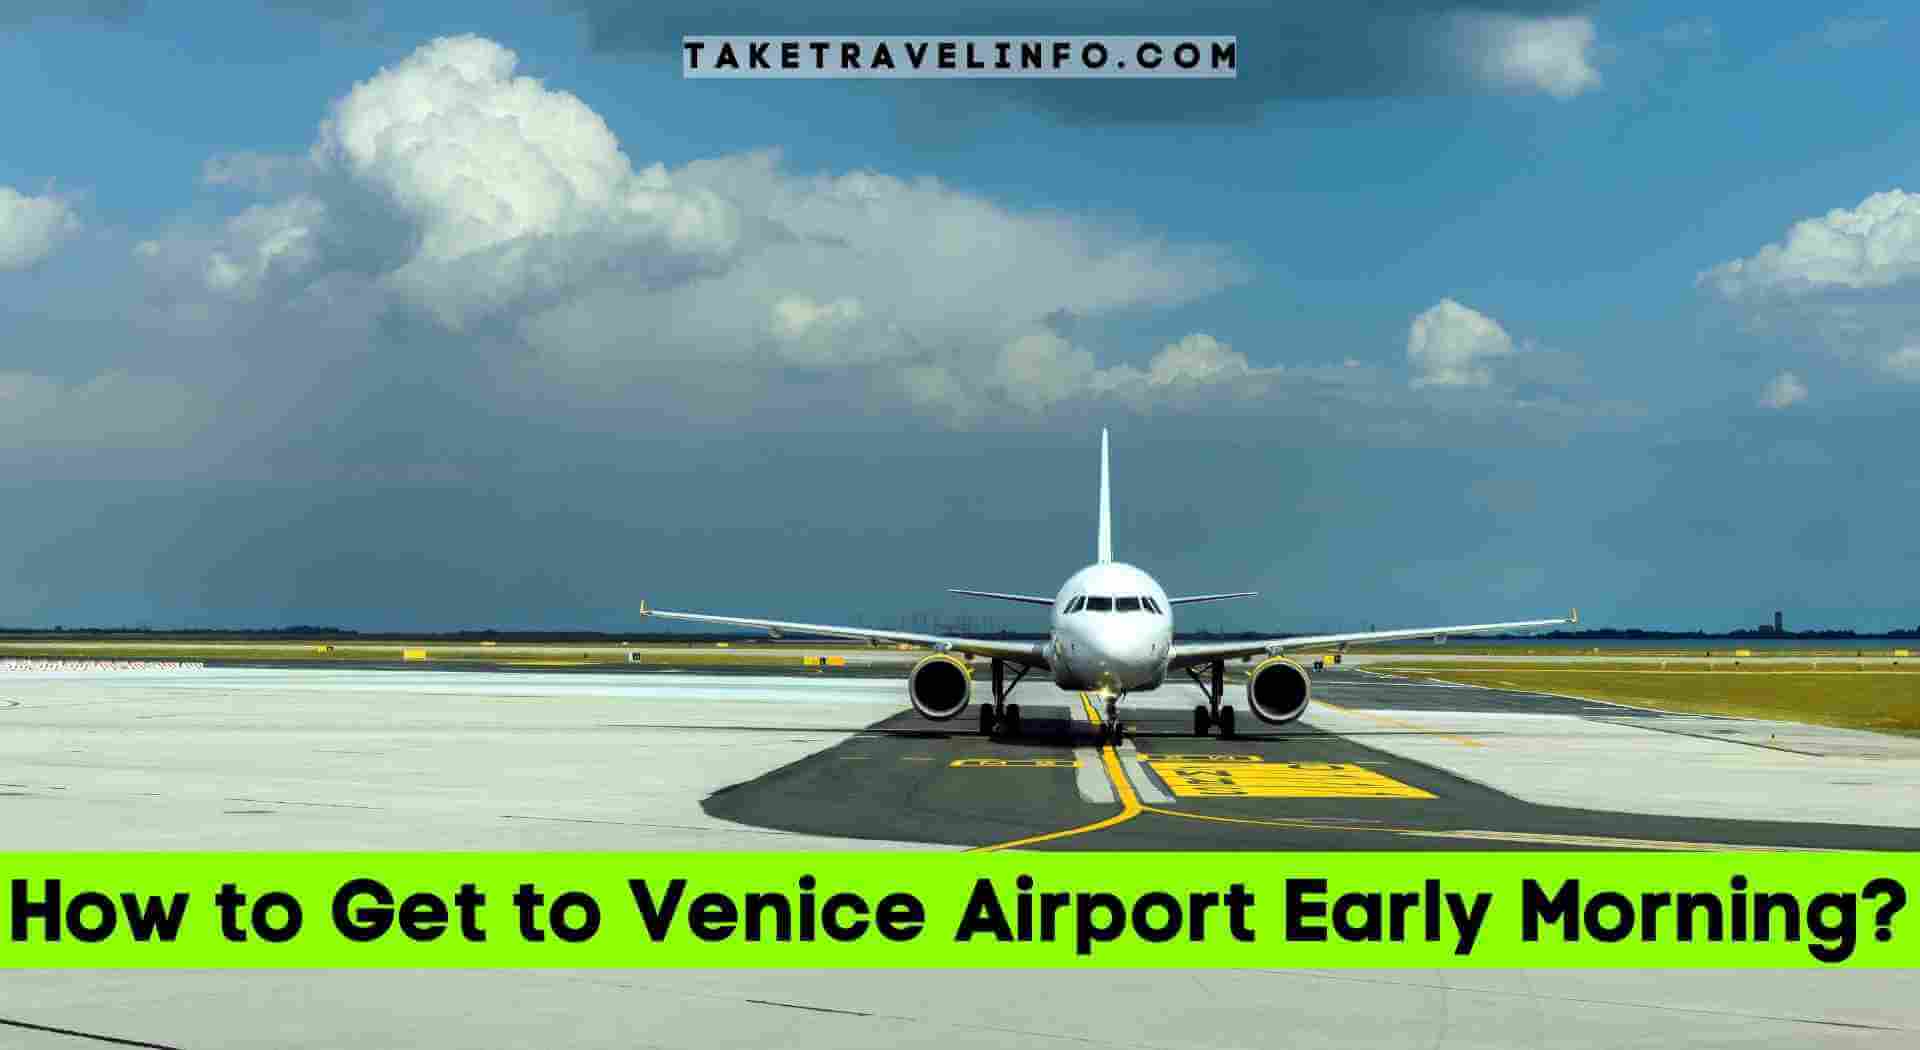 How to Get to Venice Airport Early Morning?